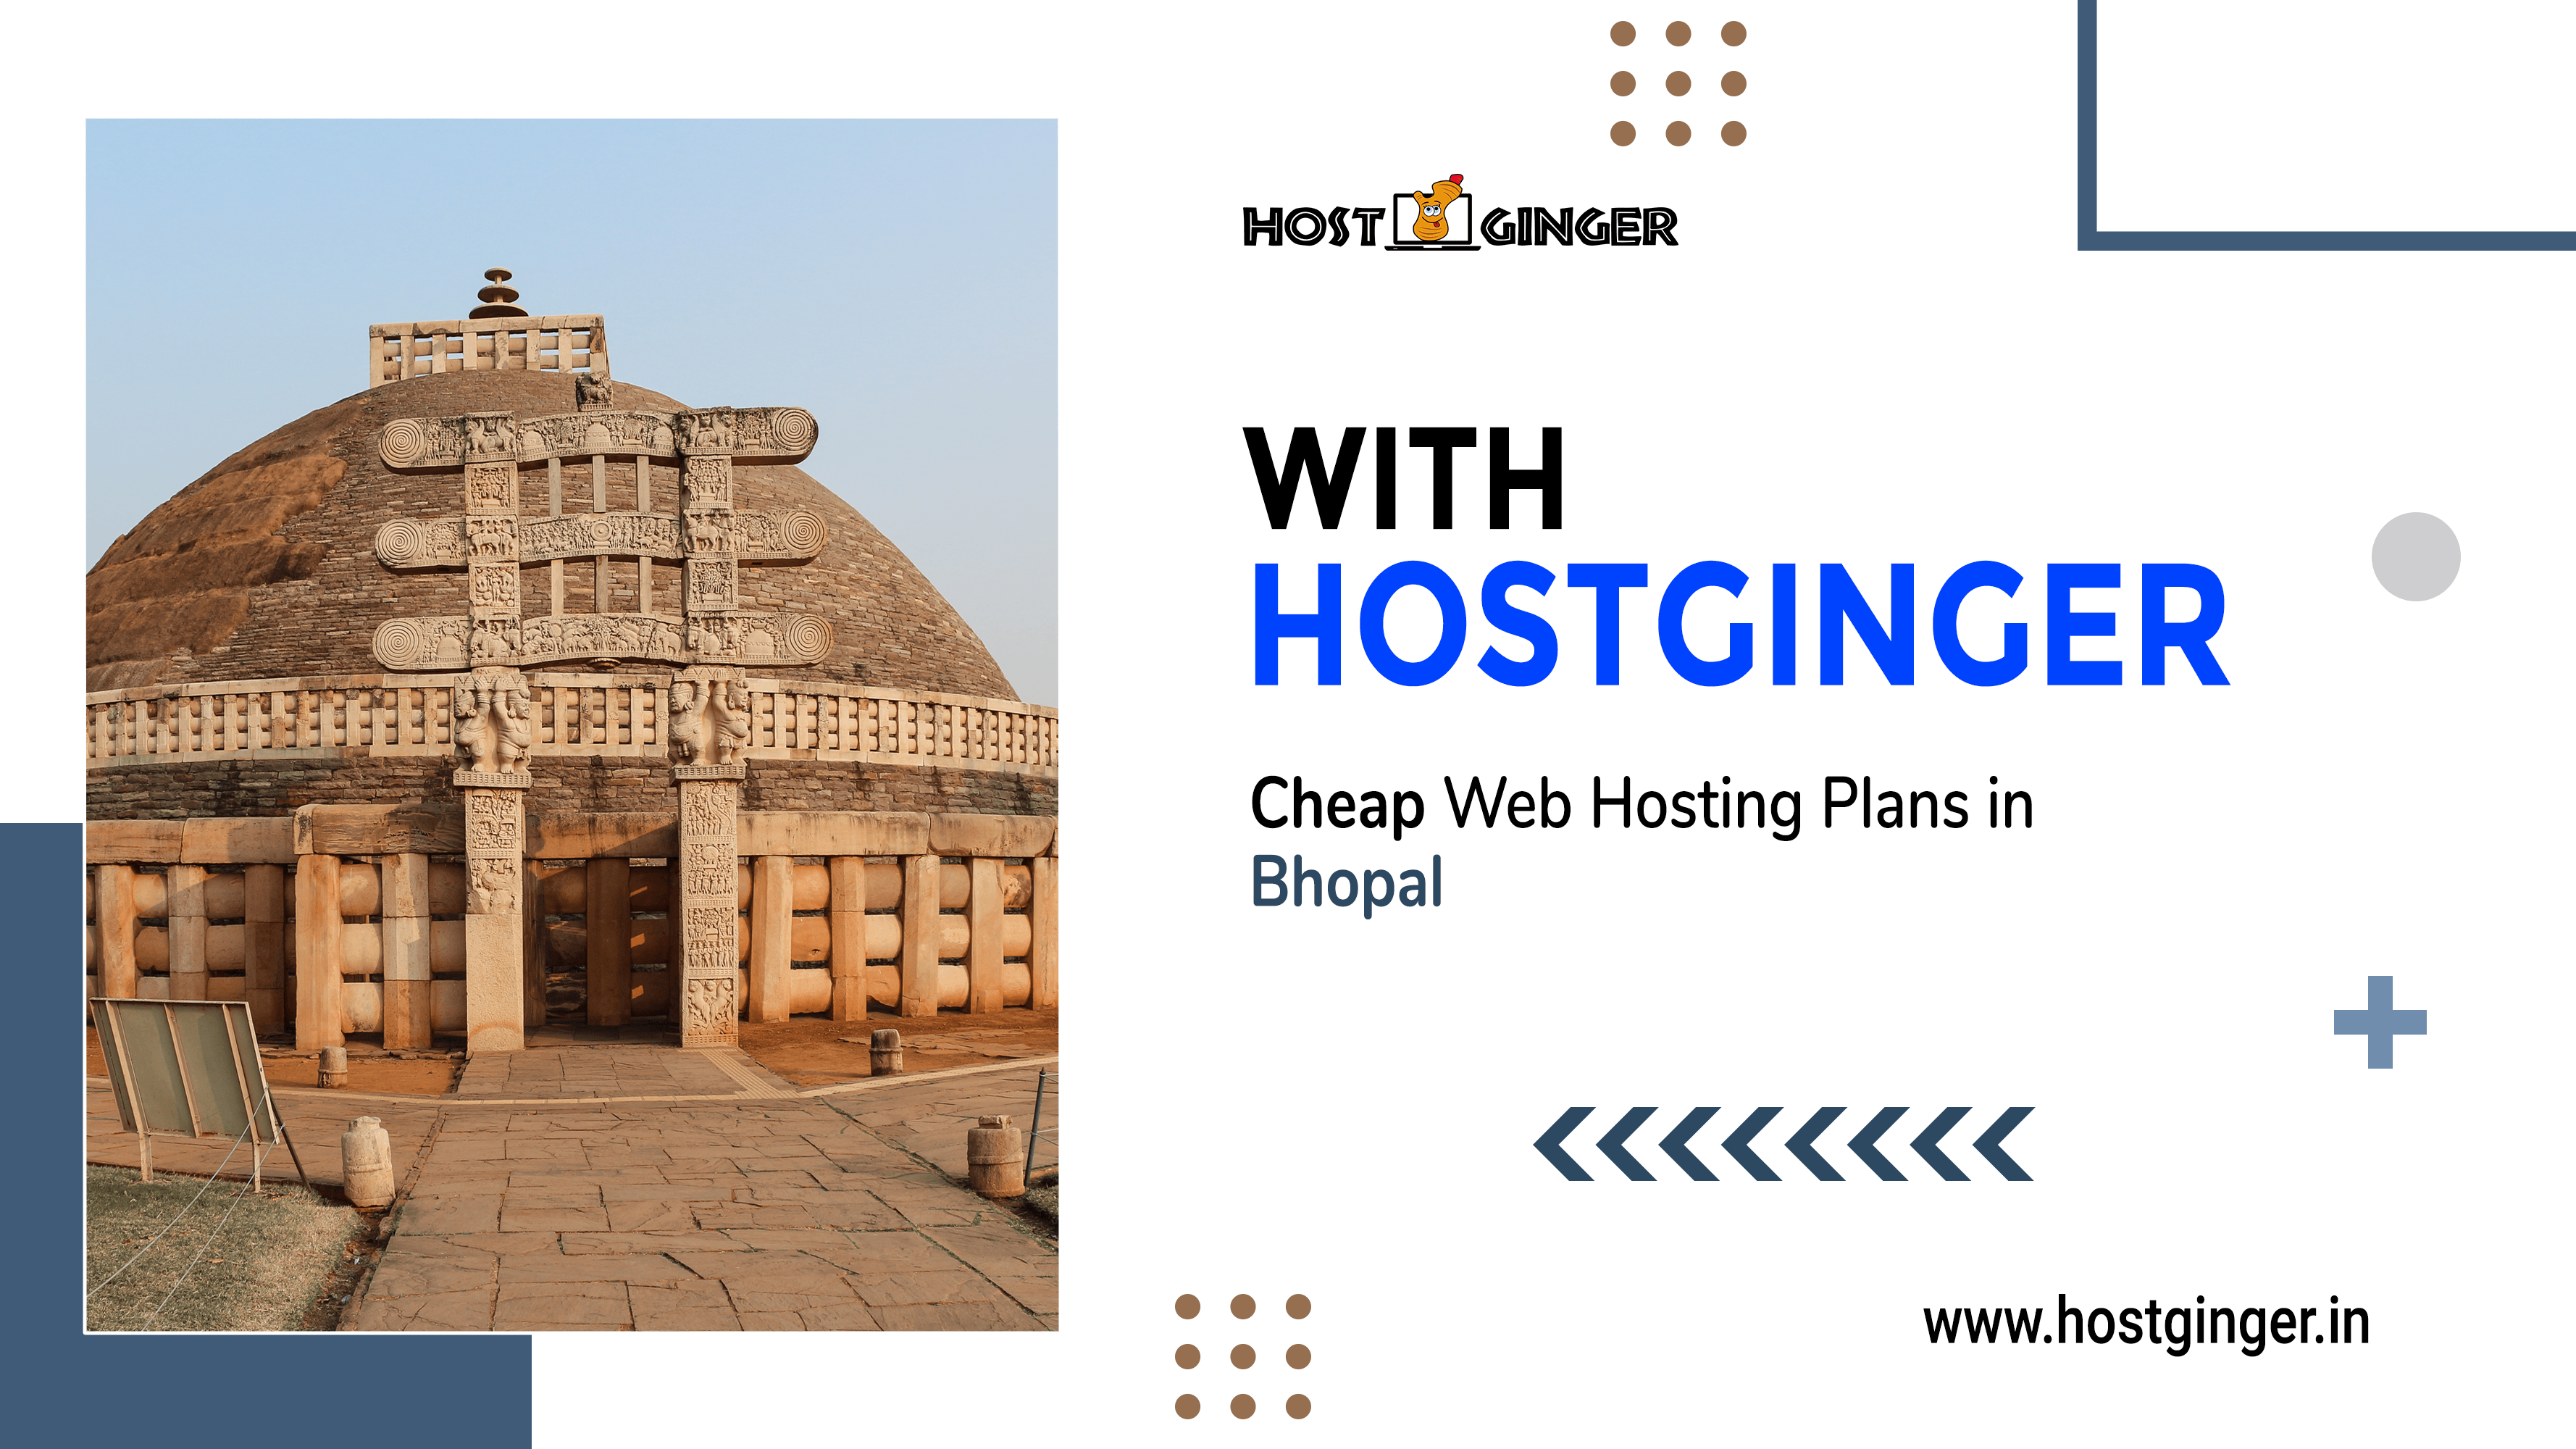 Affordable Web Hosting Plans in Bhopal